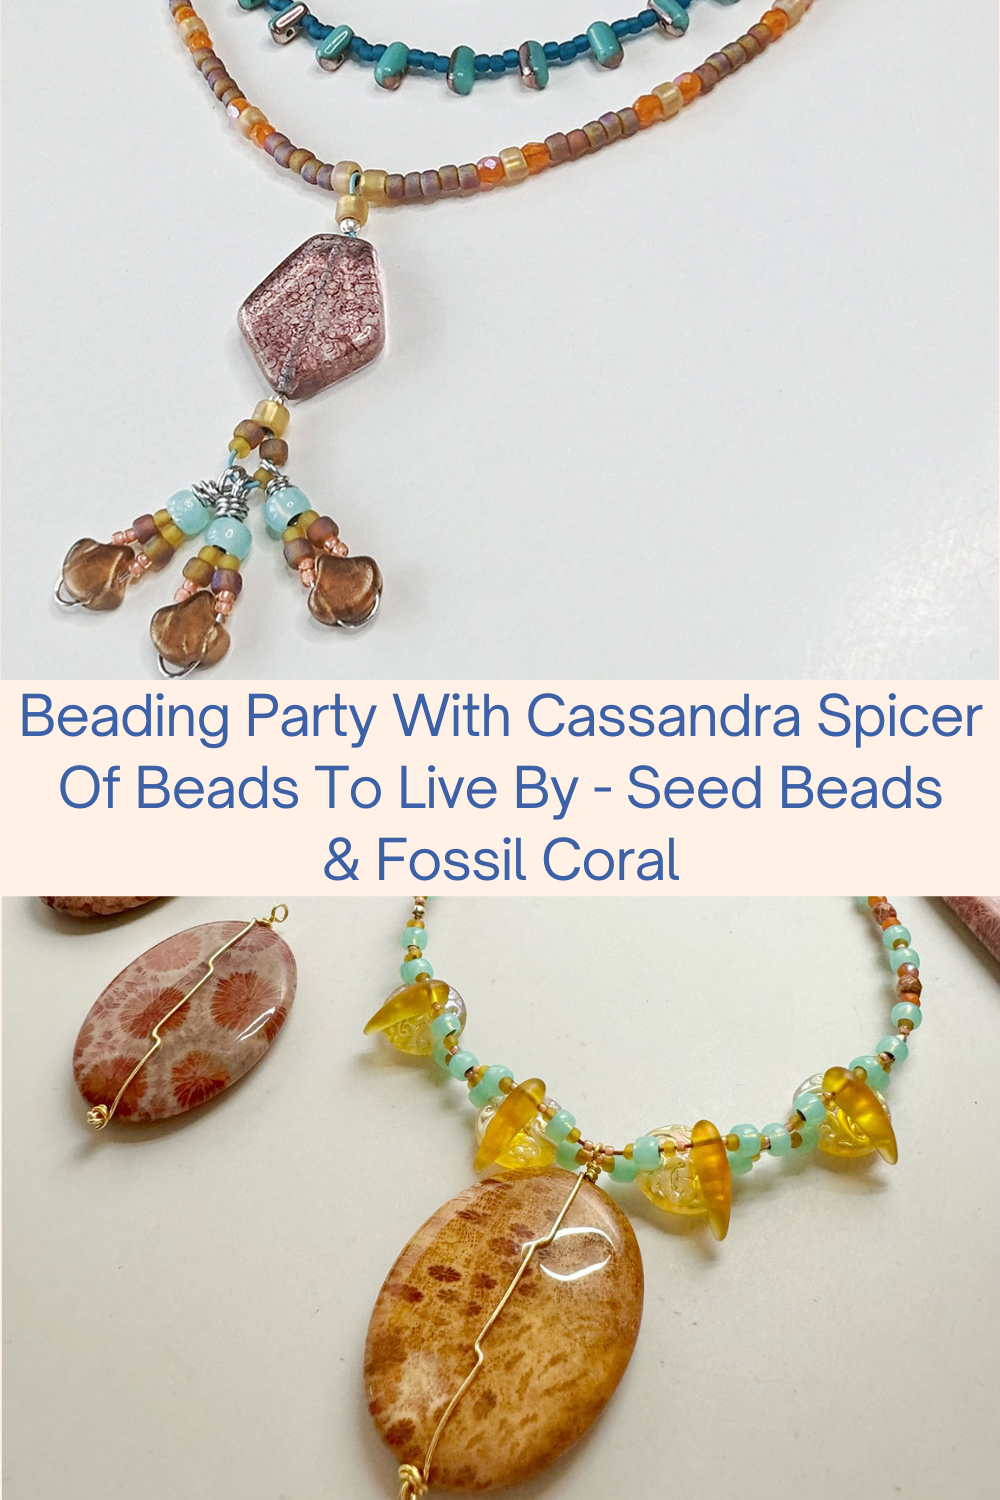 Beading Party With Cassandra Spicer Of Beads To Live By - Seed Beads & Fossil Coral Collage